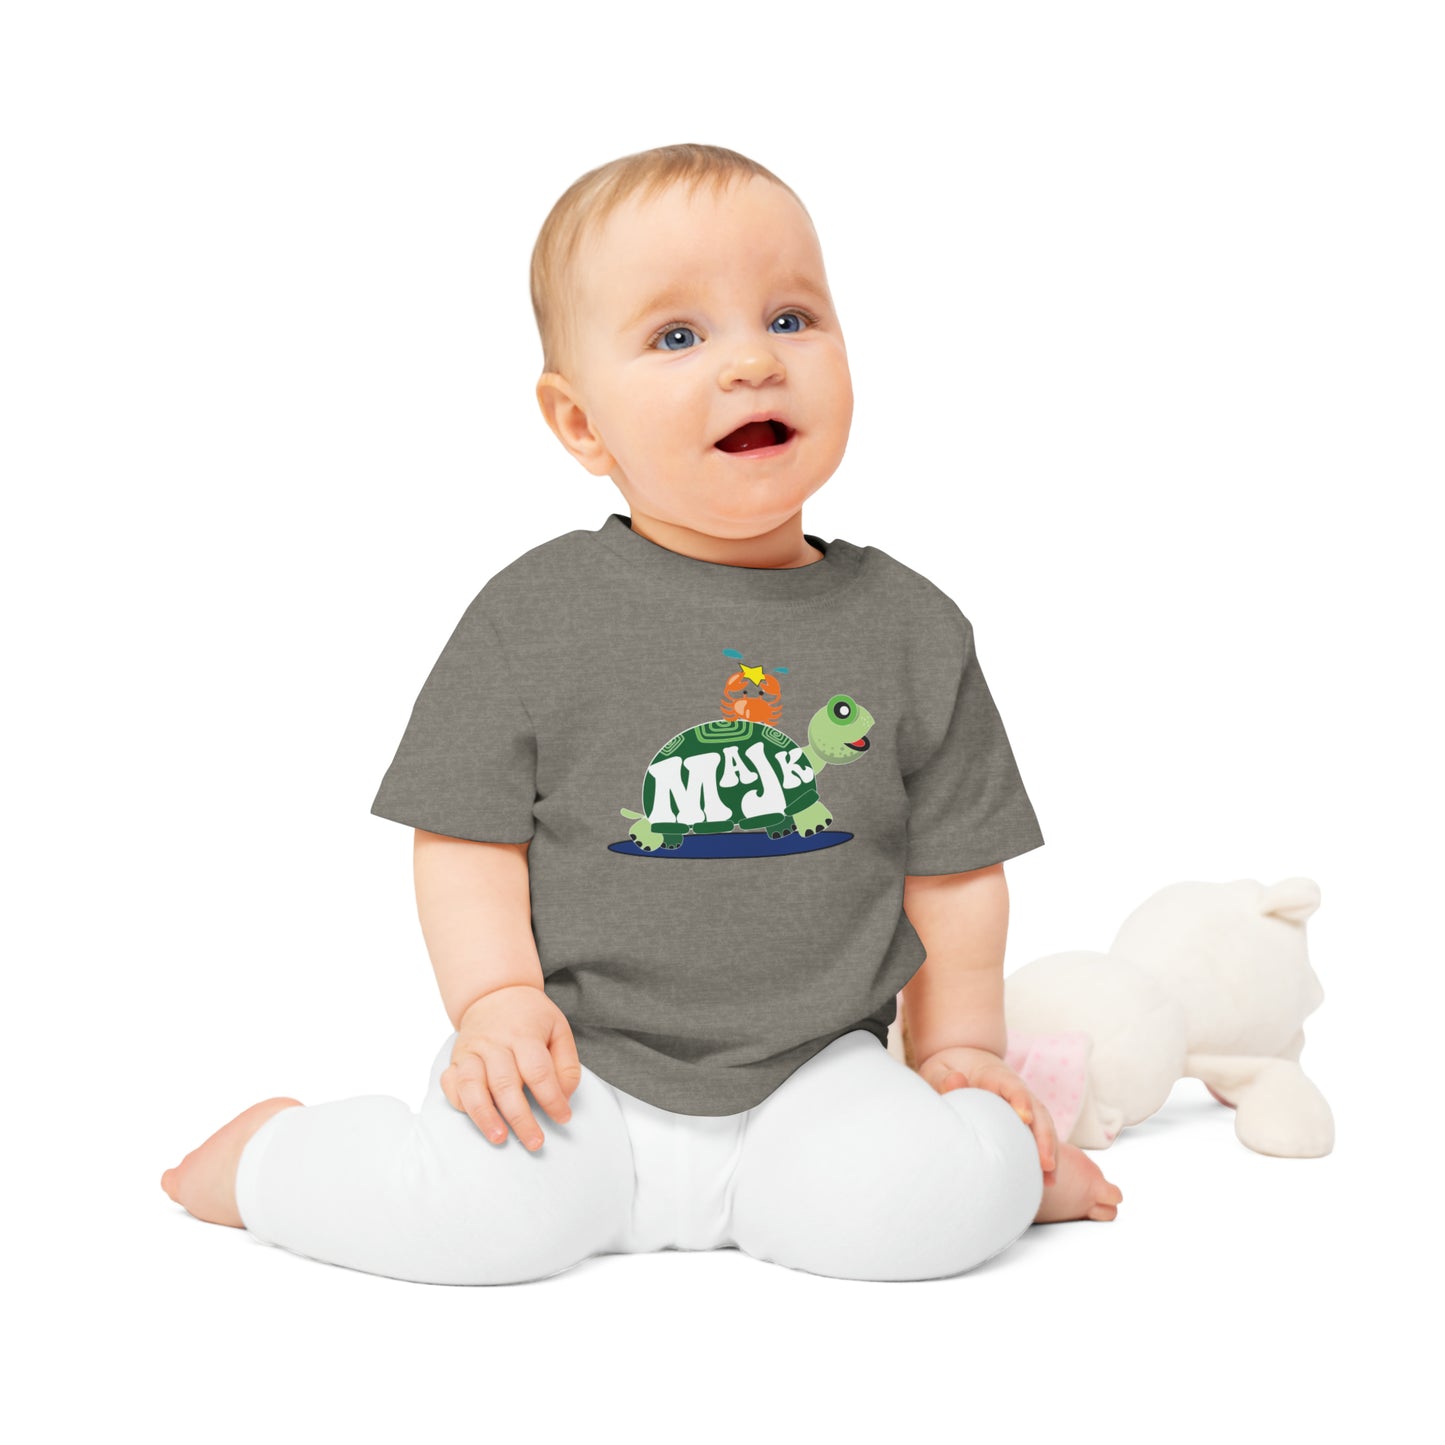 Baby T-Shirt -"Bestie's" Collection w/ unilateral shoulder snaps